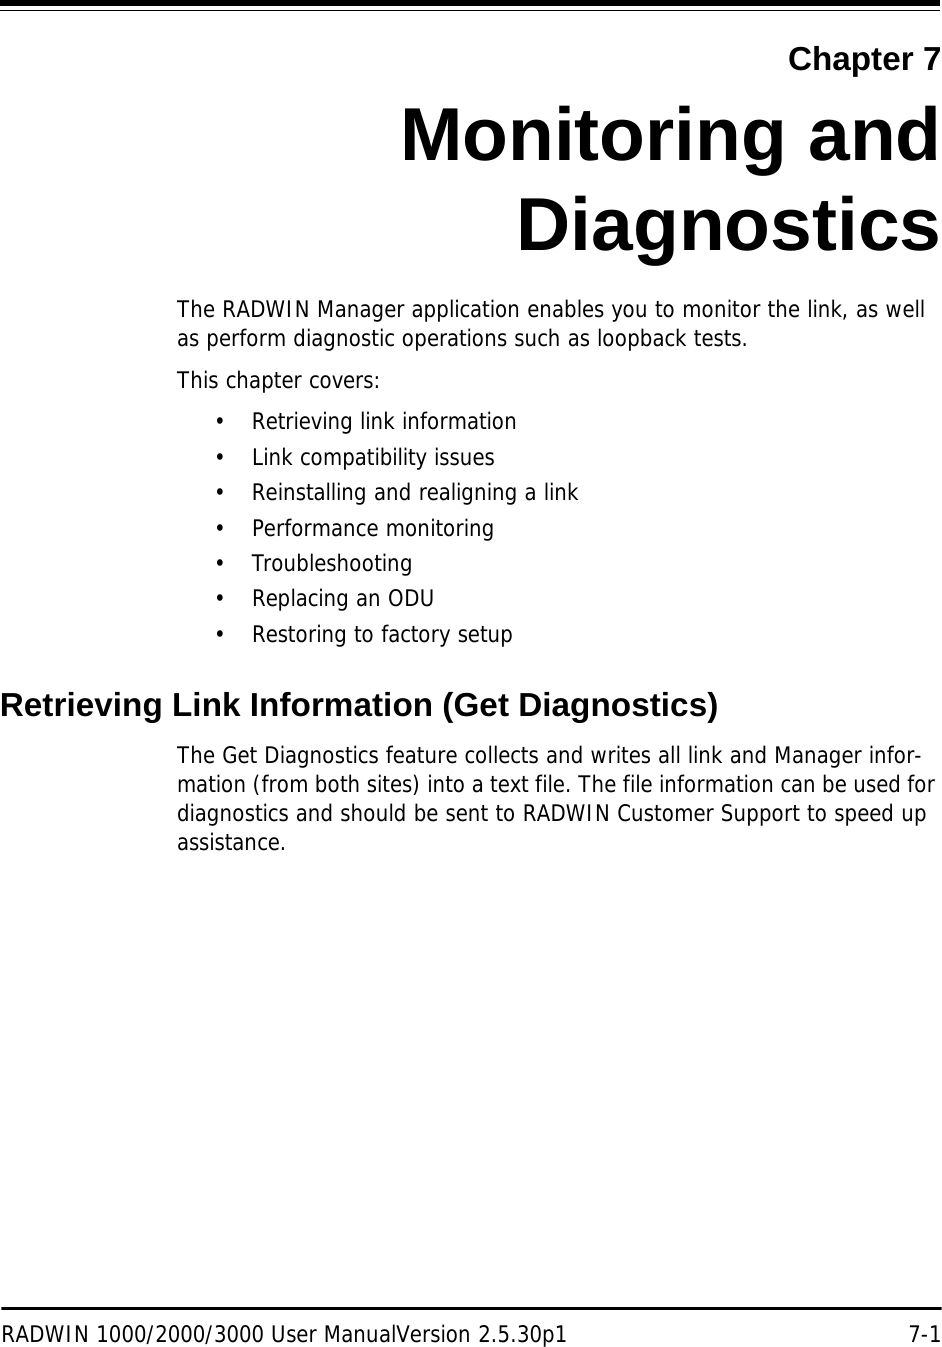 RADWIN 1000/2000/3000 User ManualVersion 2.5.30p1 7-1Chapter 7Monitoring andDiagnosticsThe RADWIN Manager application enables you to monitor the link, as well as perform diagnostic operations such as loopback tests. This chapter covers:• Retrieving link information• Link compatibility issues• Reinstalling and realigning a link• Performance monitoring• Troubleshooting•Replacing an ODU• Restoring to factory setupRetrieving Link Information (Get Diagnostics)The Get Diagnostics feature collects and writes all link and Manager infor-mation (from both sites) into a text file. The file information can be used for diagnostics and should be sent to RADWIN Customer Support to speed up assistance.